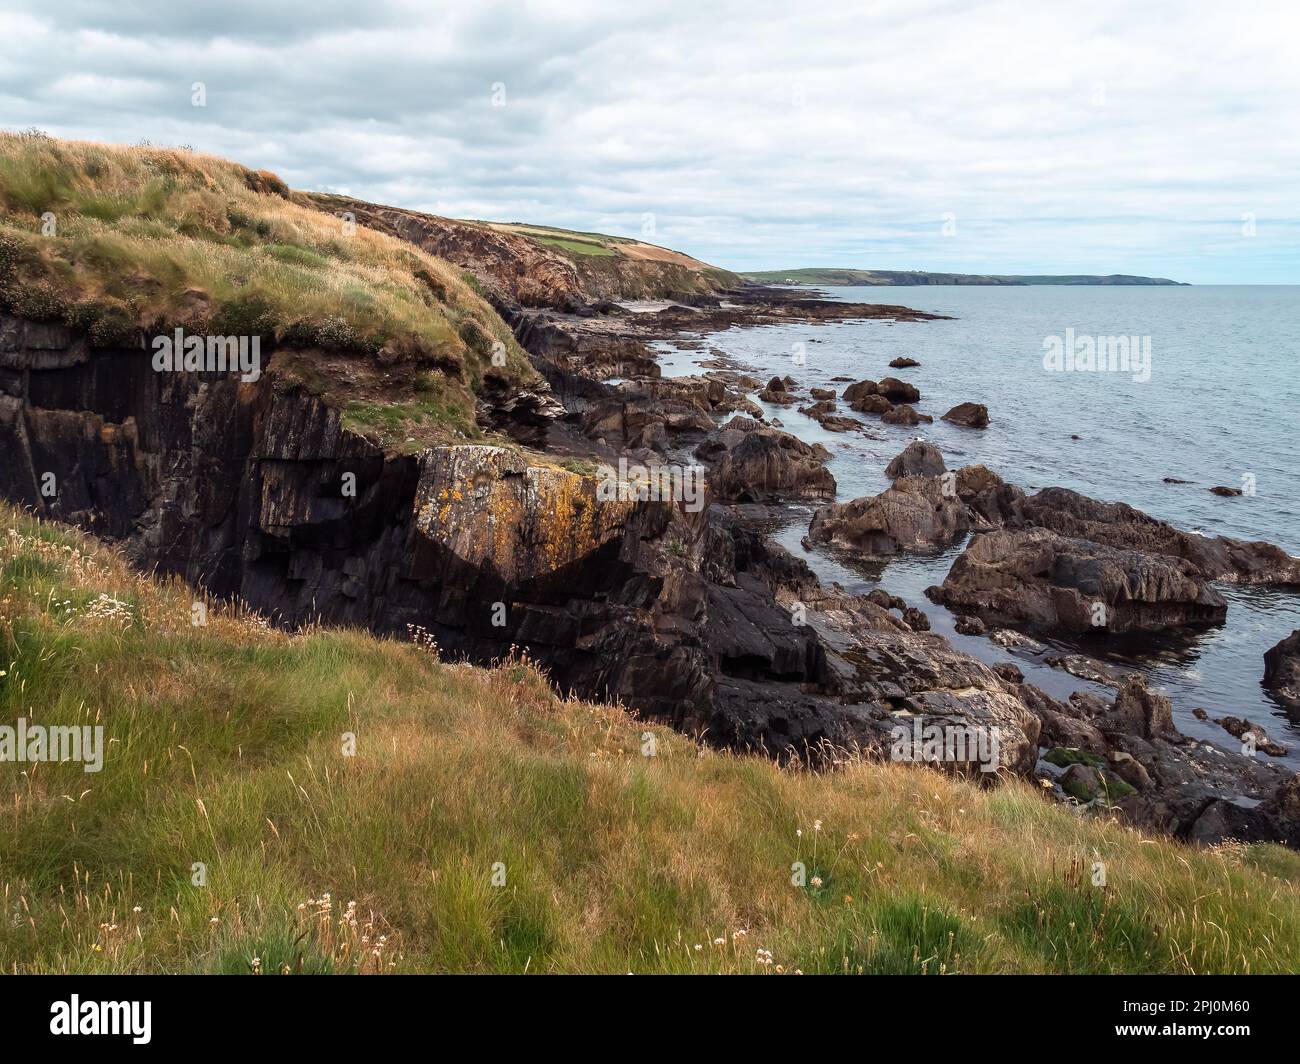 Picturesque landscape. Wild vegetation on stony soil. Cloudy sky over the ocean coast. Views on the wild Atlantic way, hills under clouds. Stock Photo